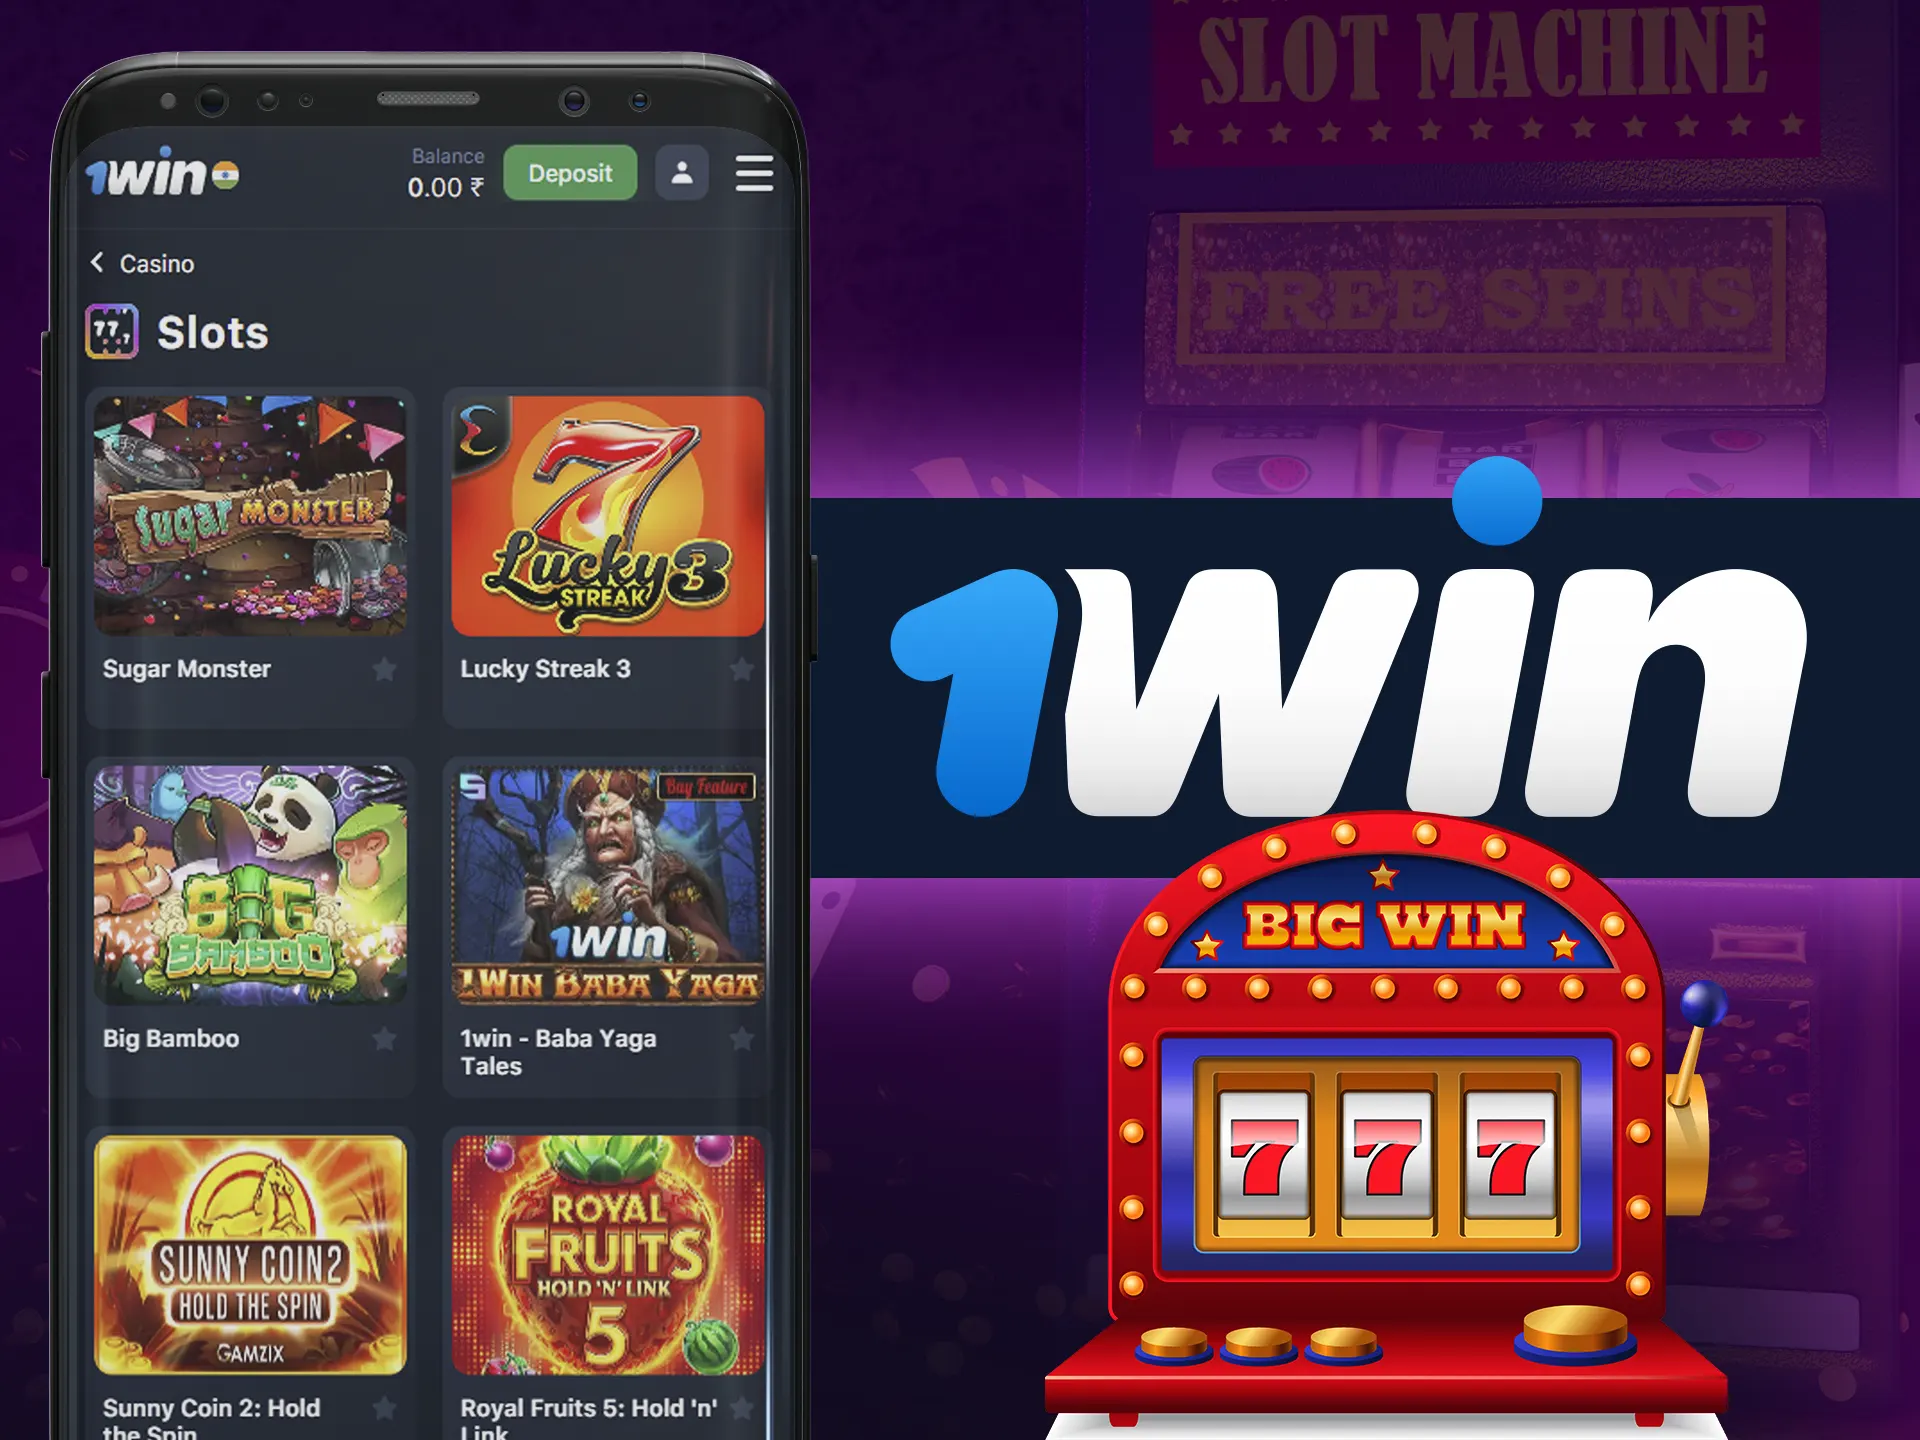 With 1Win app, choose to play any slots you want.